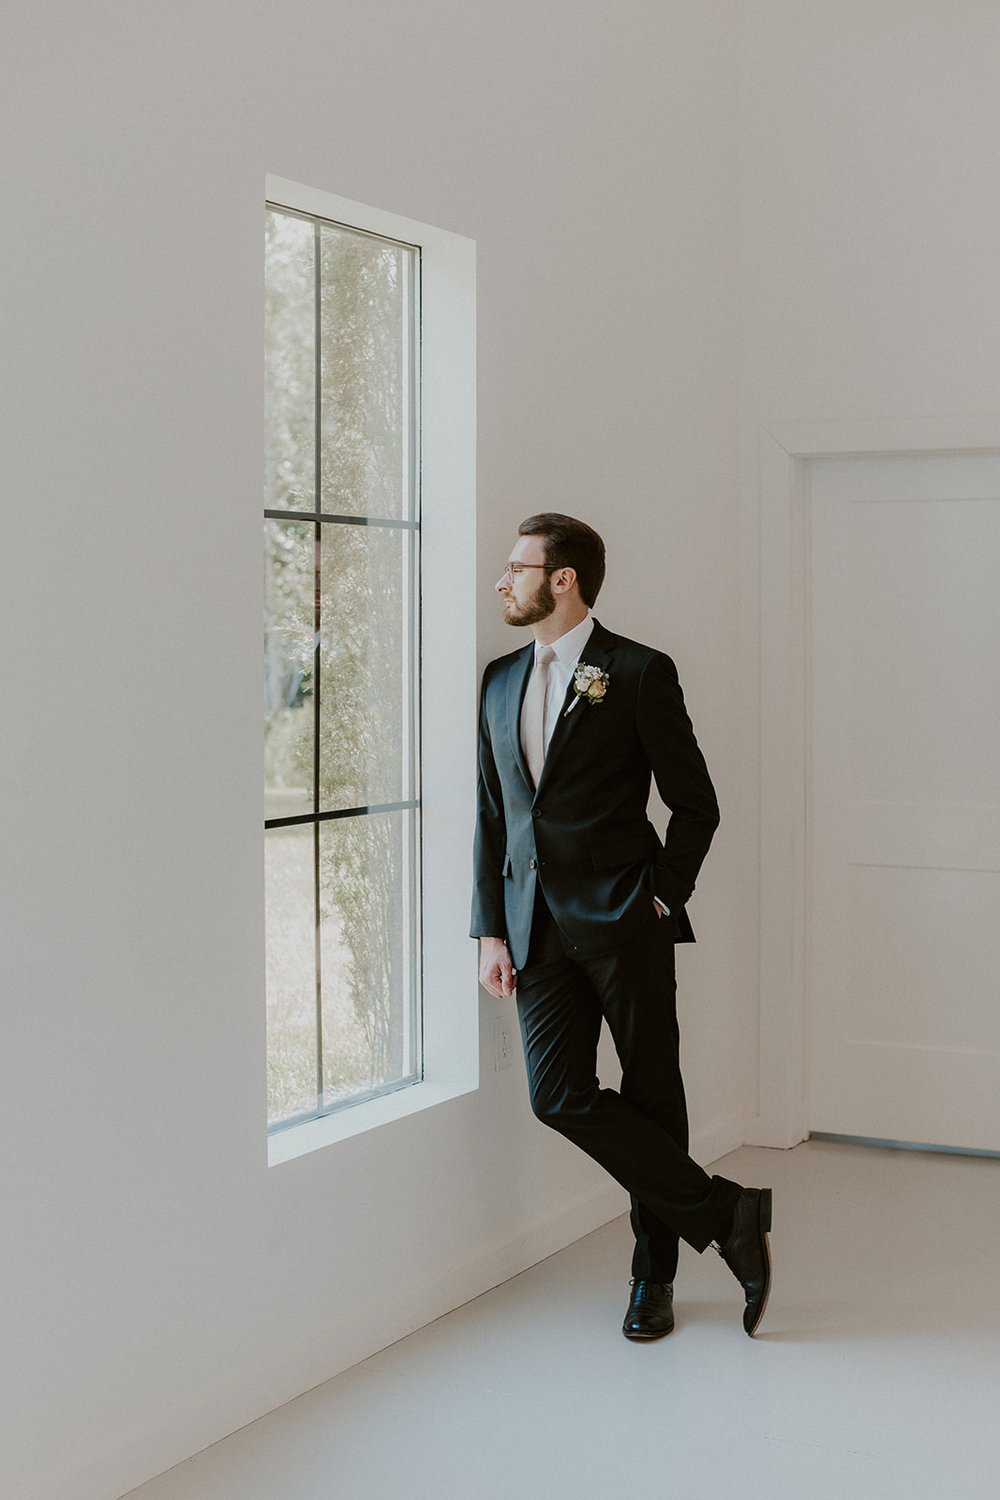 Groom leaning against the wall inside the venue looking out the window dressed in his black tux.